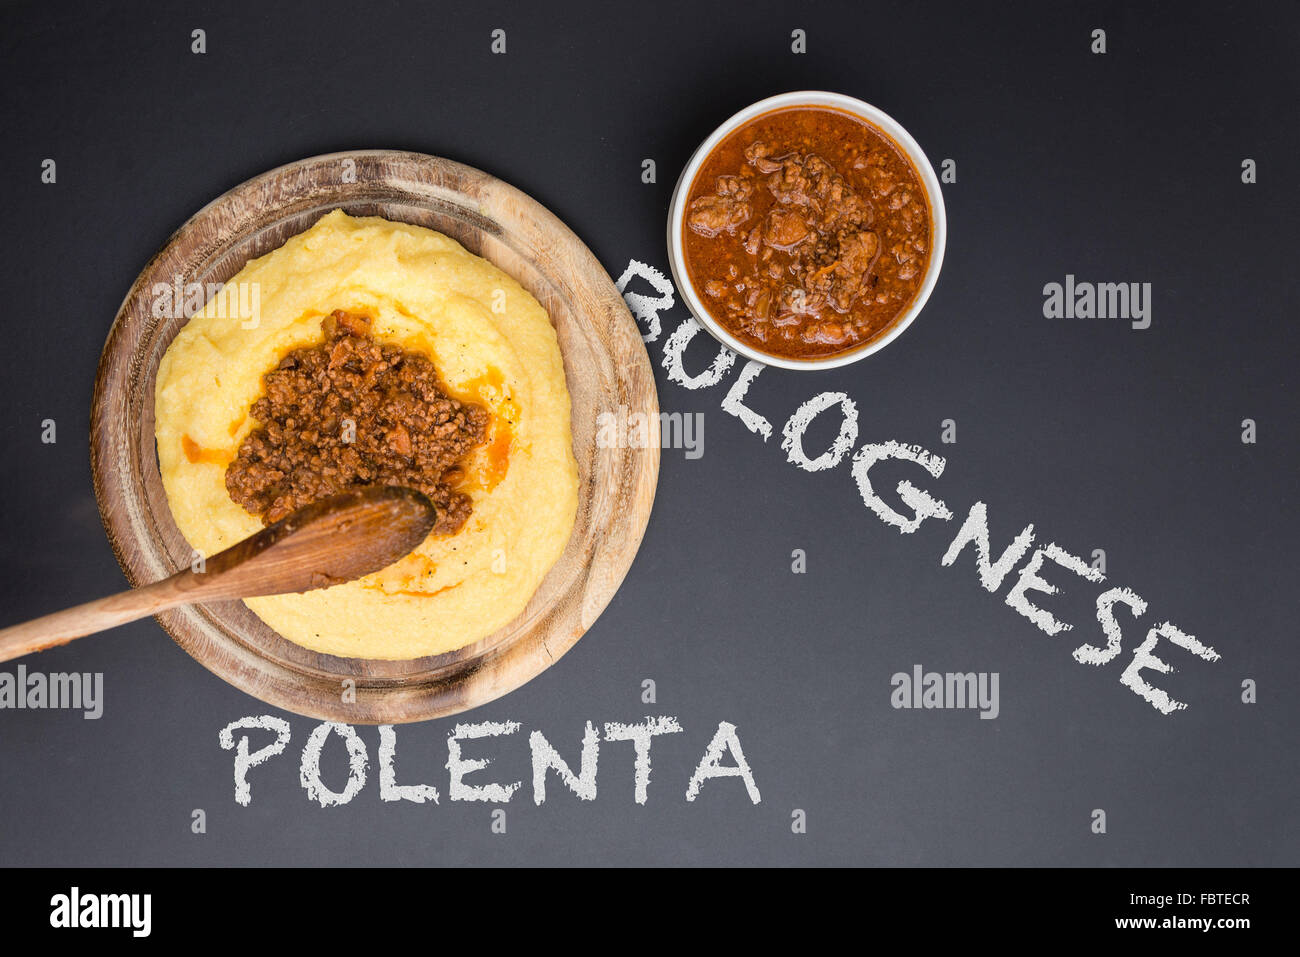 A dish of Polenta with bolognese soup (aka Ragout) standing on a black-board. Bolognese and polenta on the blackboard Stock Photo